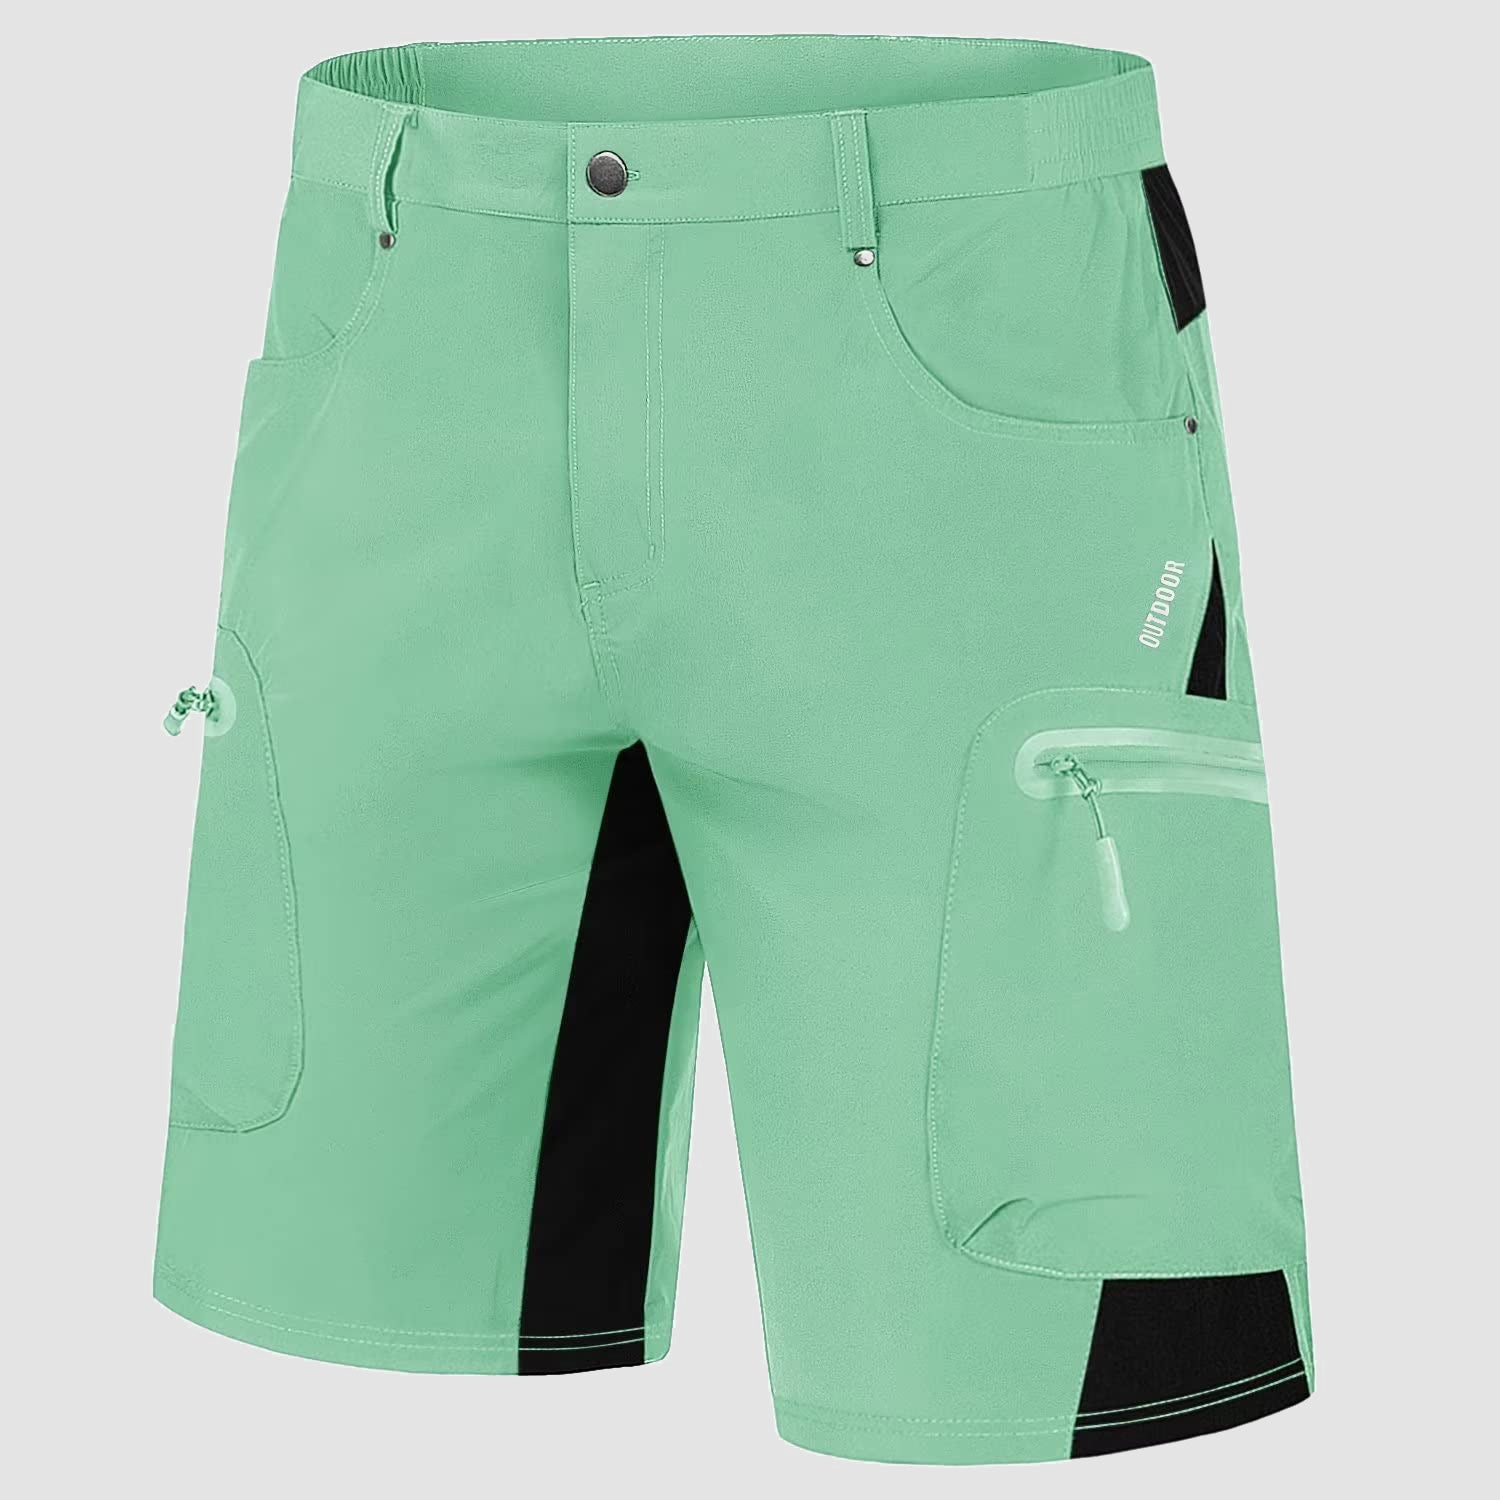 Buy Pockets Cargo Qui Free！】Men\'s the 4 5 MAGCOMSEN Get 4th Shorts – Ripstop with